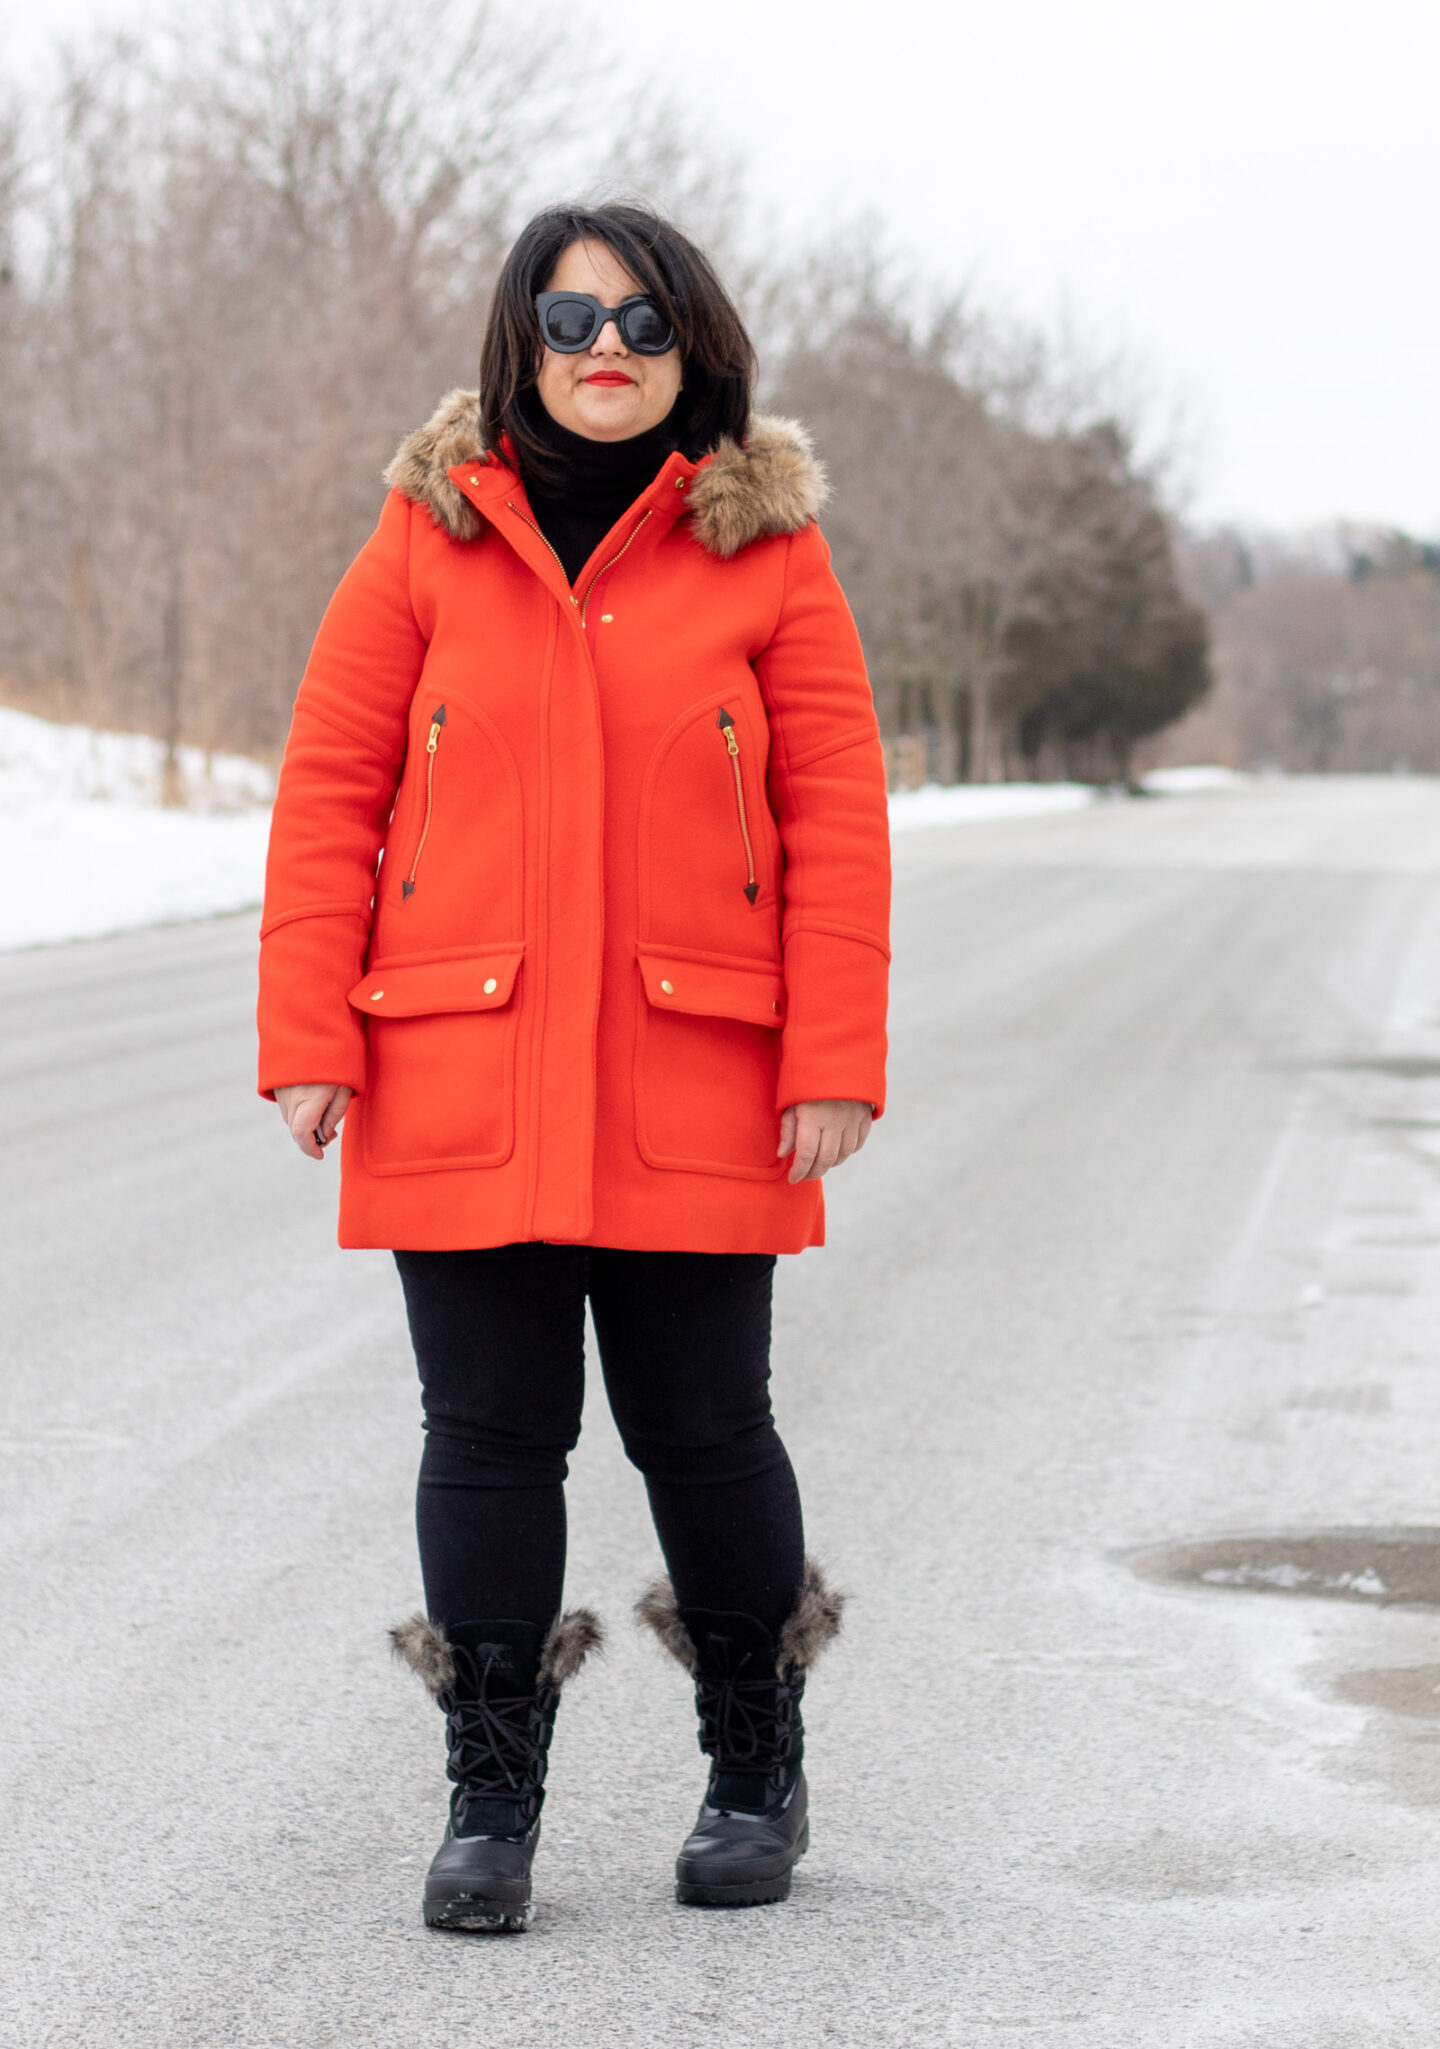 red and black, jcrew chateau parka